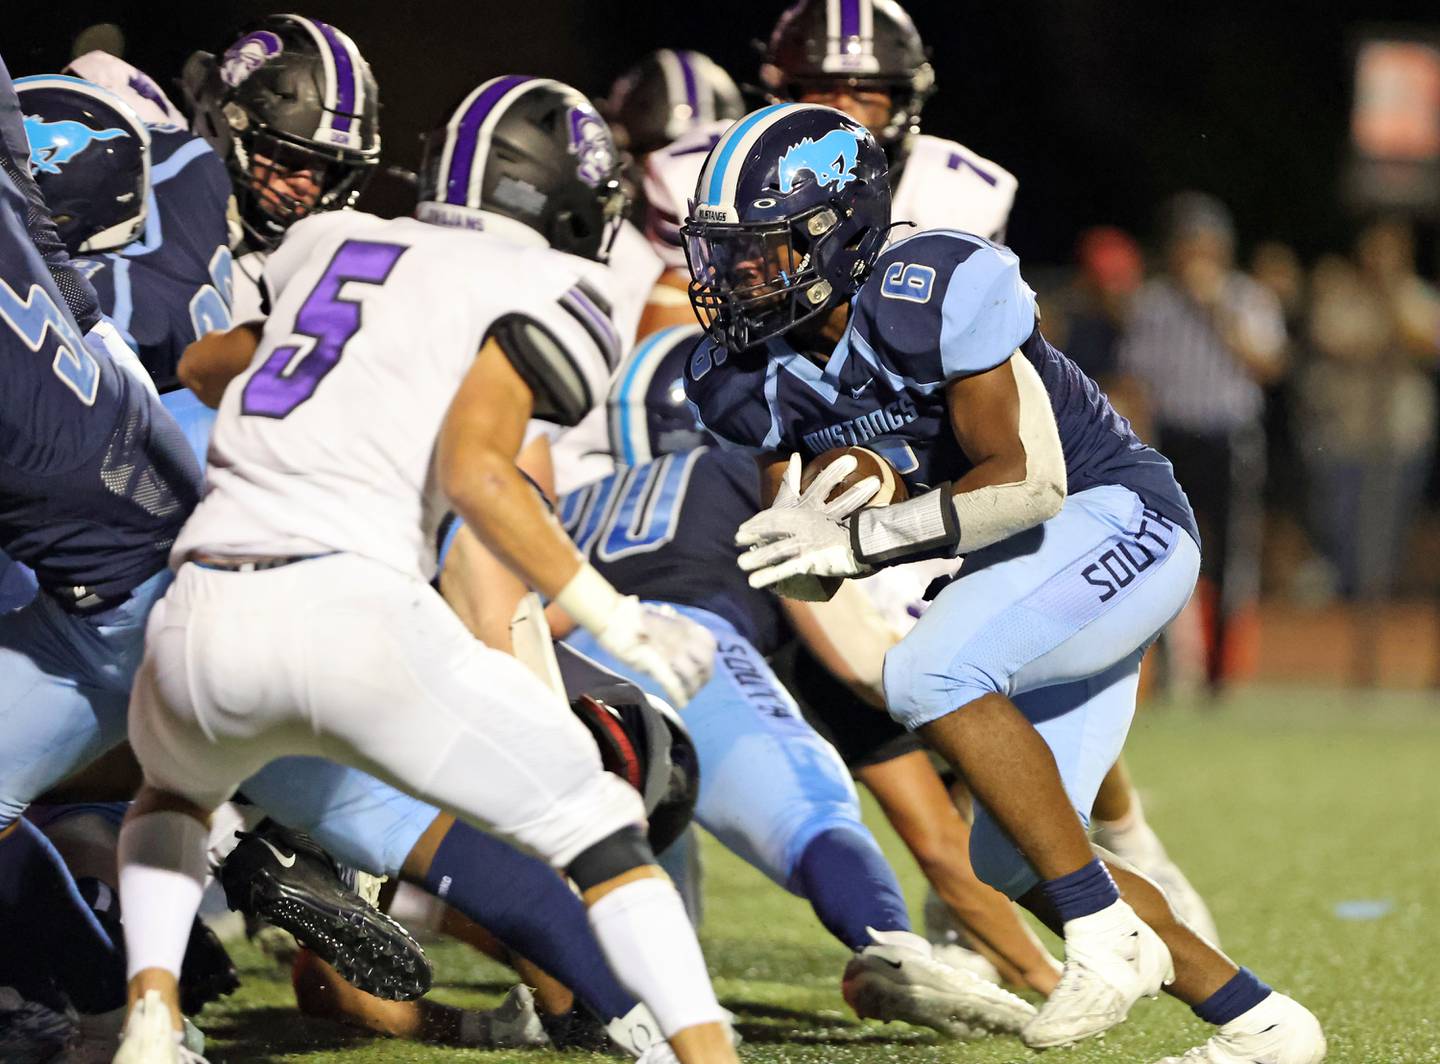 Downers Grove South’s Deon Davis (6) runs against Downers Grove North during the boys varsity football game on Friday, Sept. 1, 2023.